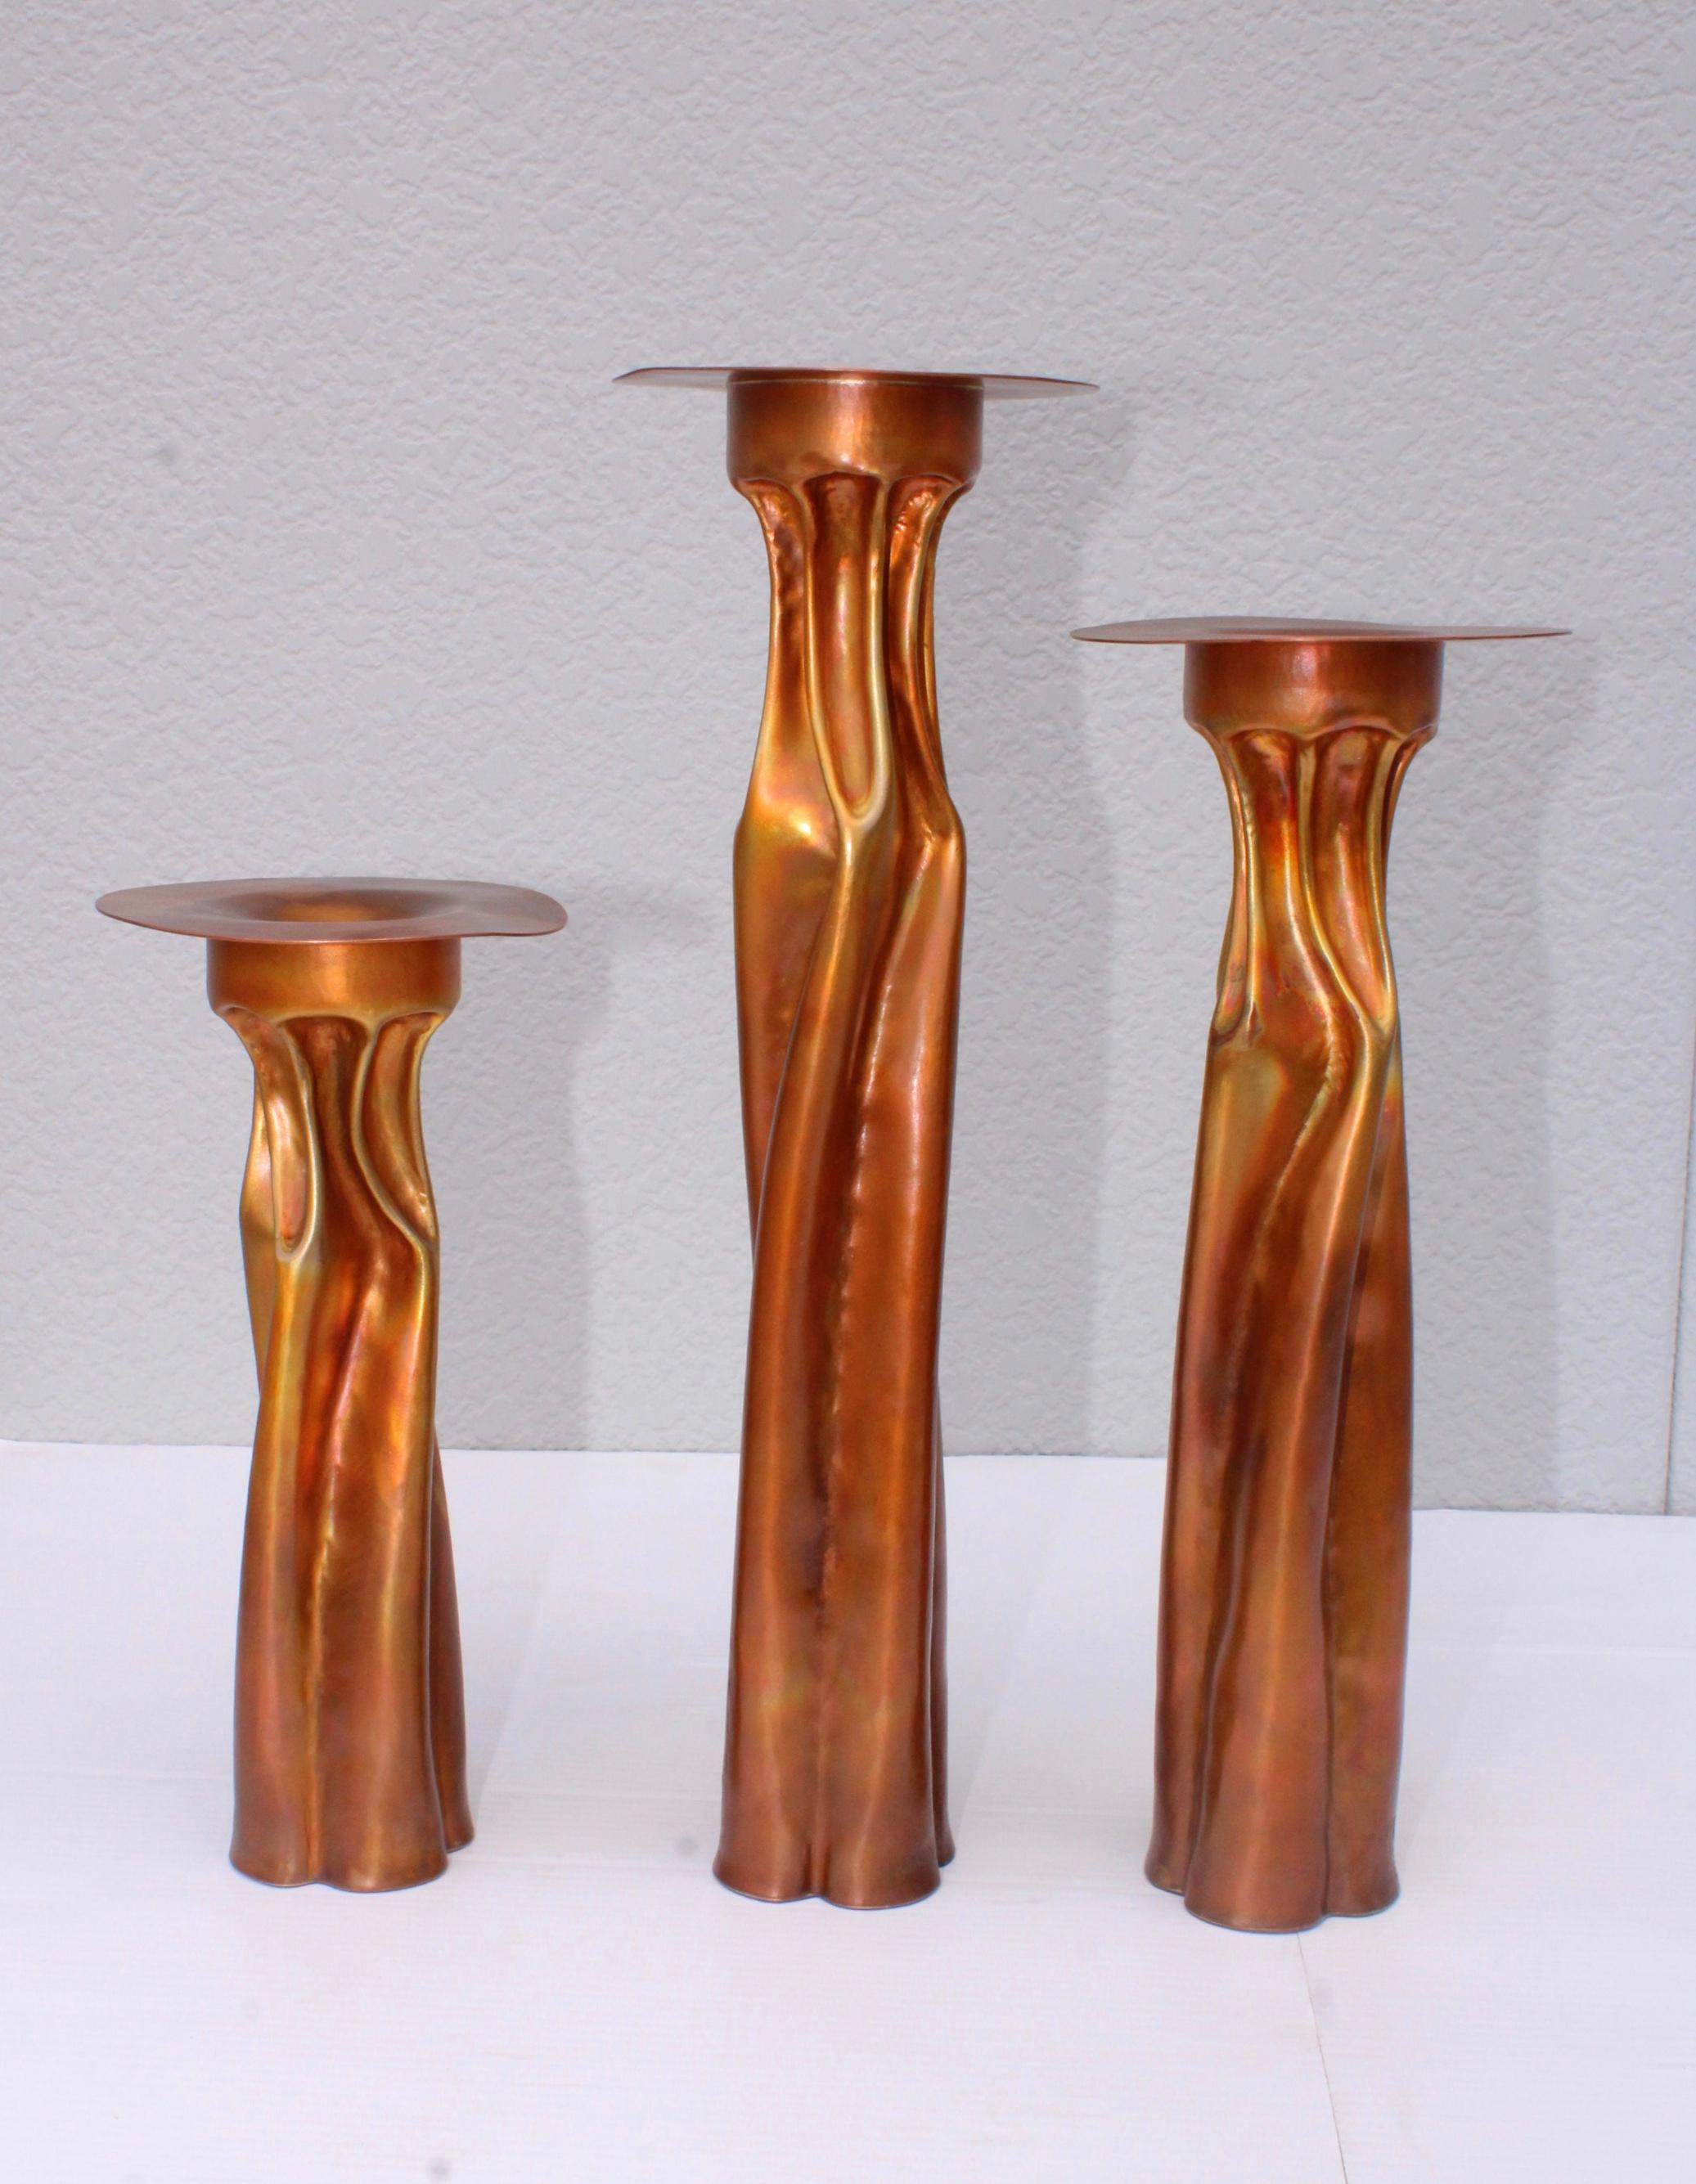 1970s handcrafted copper Brutalist candleholders by Thomas Roy Markusen, in vintage original condition with minor wear and patina.

Measures: Medium candleholder height 16